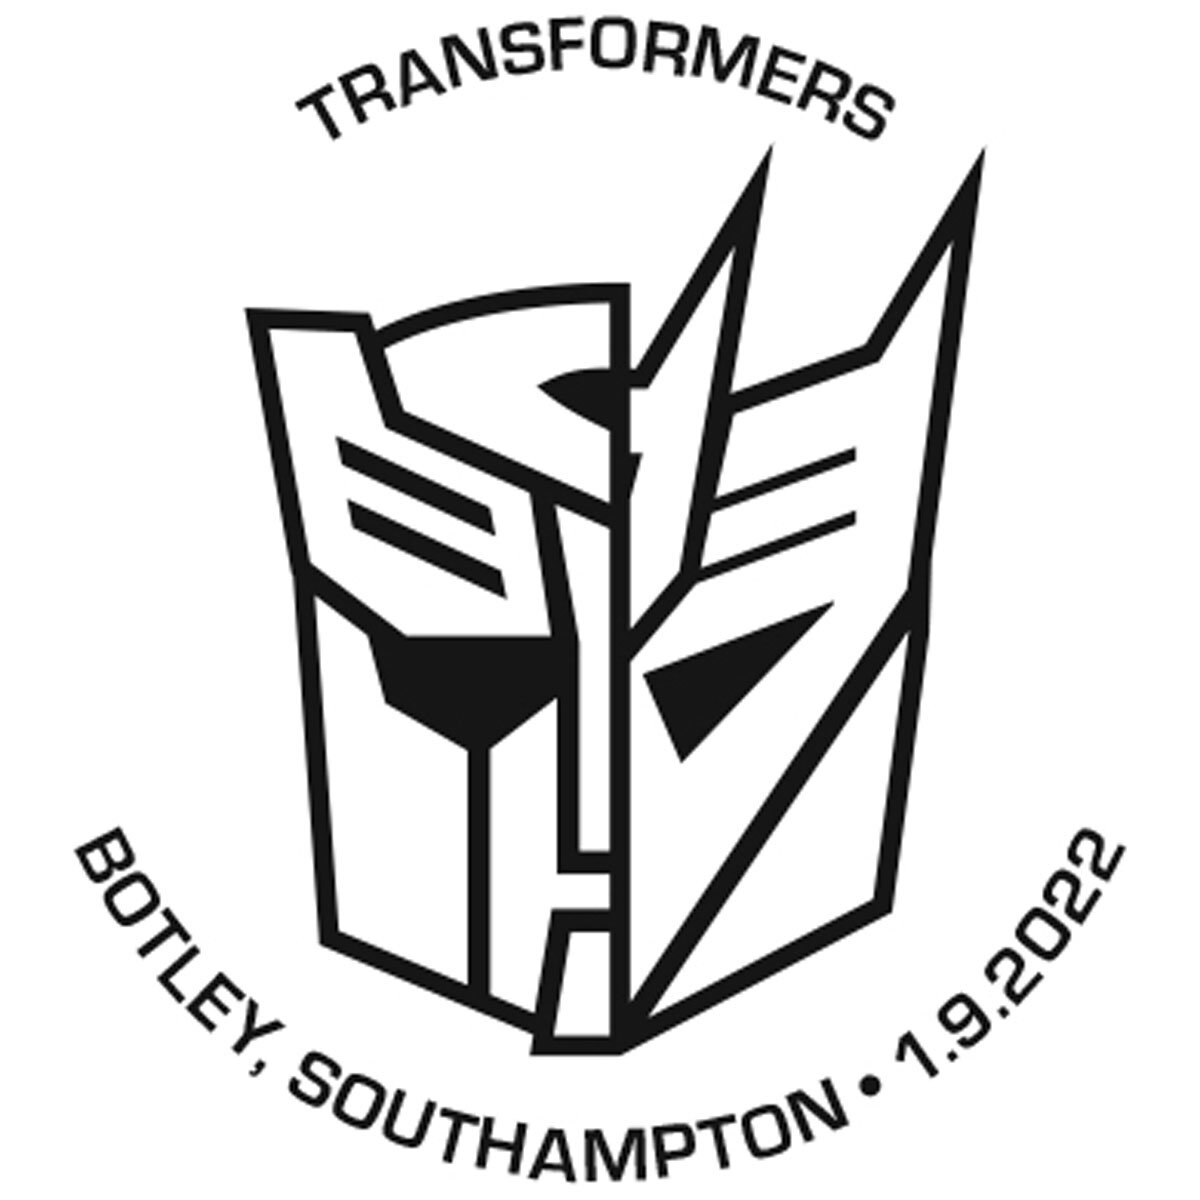 Buy Transformers Silver Plated Medal Cover Hand Stamp Image at Costco.co.uk